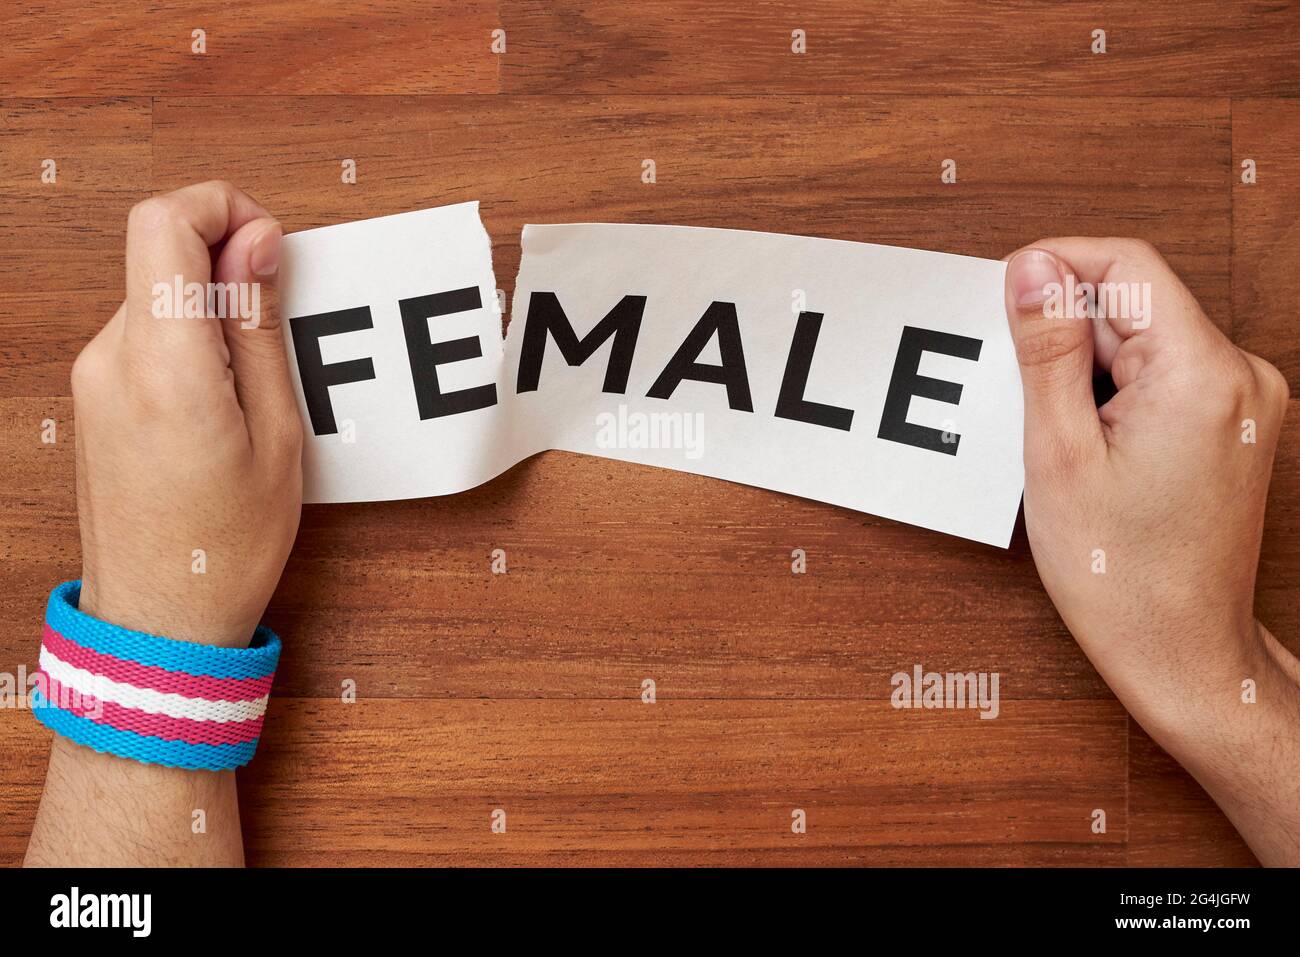 Hands tearing the word female, leaving male, wearing a trans pride flag bracelet. Conceptual image about gender identity and transgender. Wood backgro Stock Photo